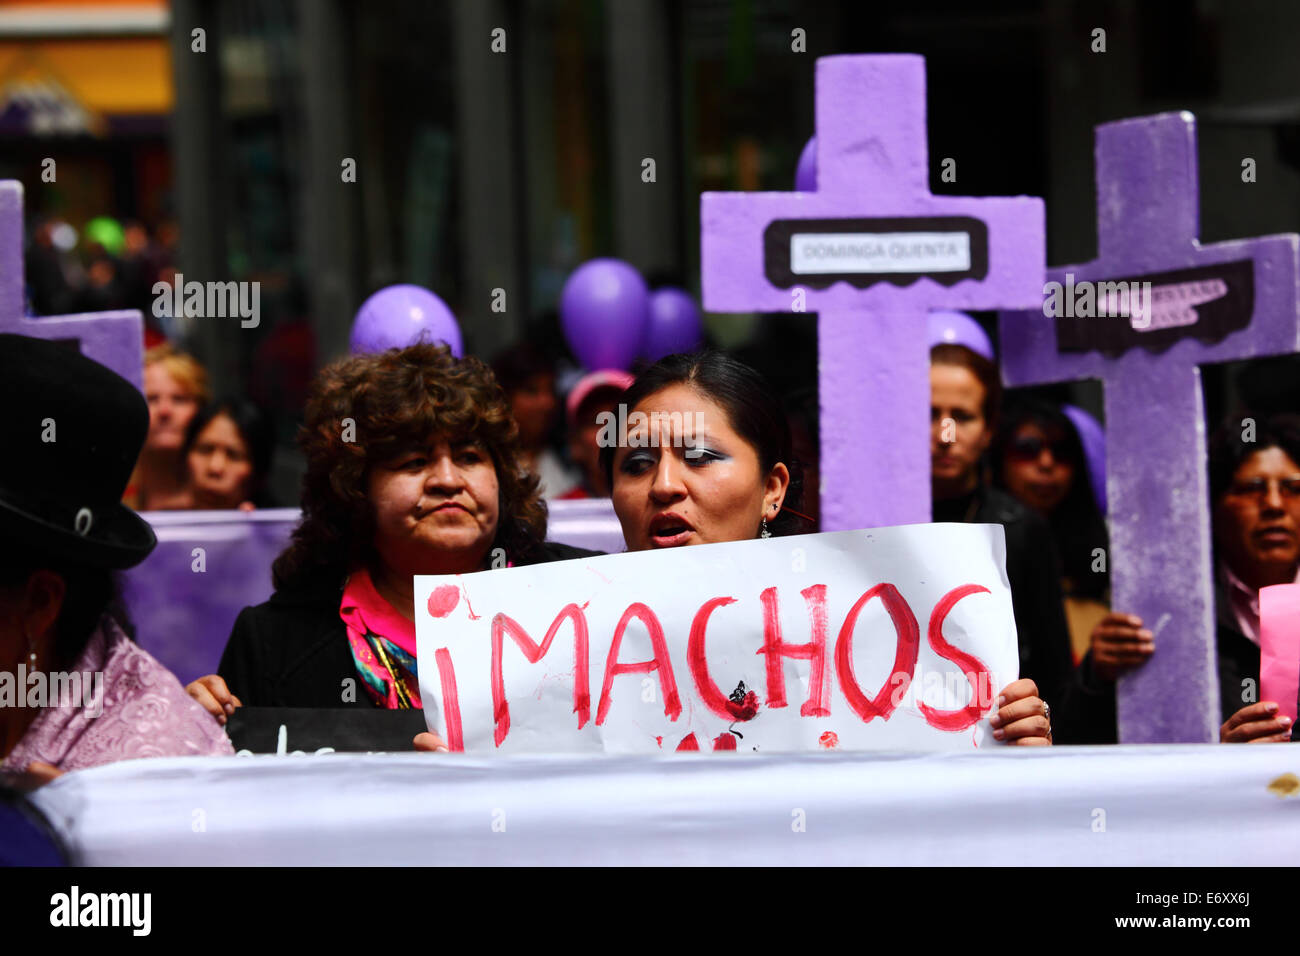 La Paz, Bolivia, 1st September 2014. Womens Rights Activists and supporters carry crosses with the names of victims during a march to protest against violence against women. The march was also to repudiate recent statements made by several candidates during the current election campaign that appear to minimise the problem and discriminate against women. According to a WHO report in January 2013 Bolivia is the country with the highest rate of violence against women in Latin America, there have been 453 cases of femicide since 2006 during the current government. Credit:  James Brunker/Alamy Live Stock Photo